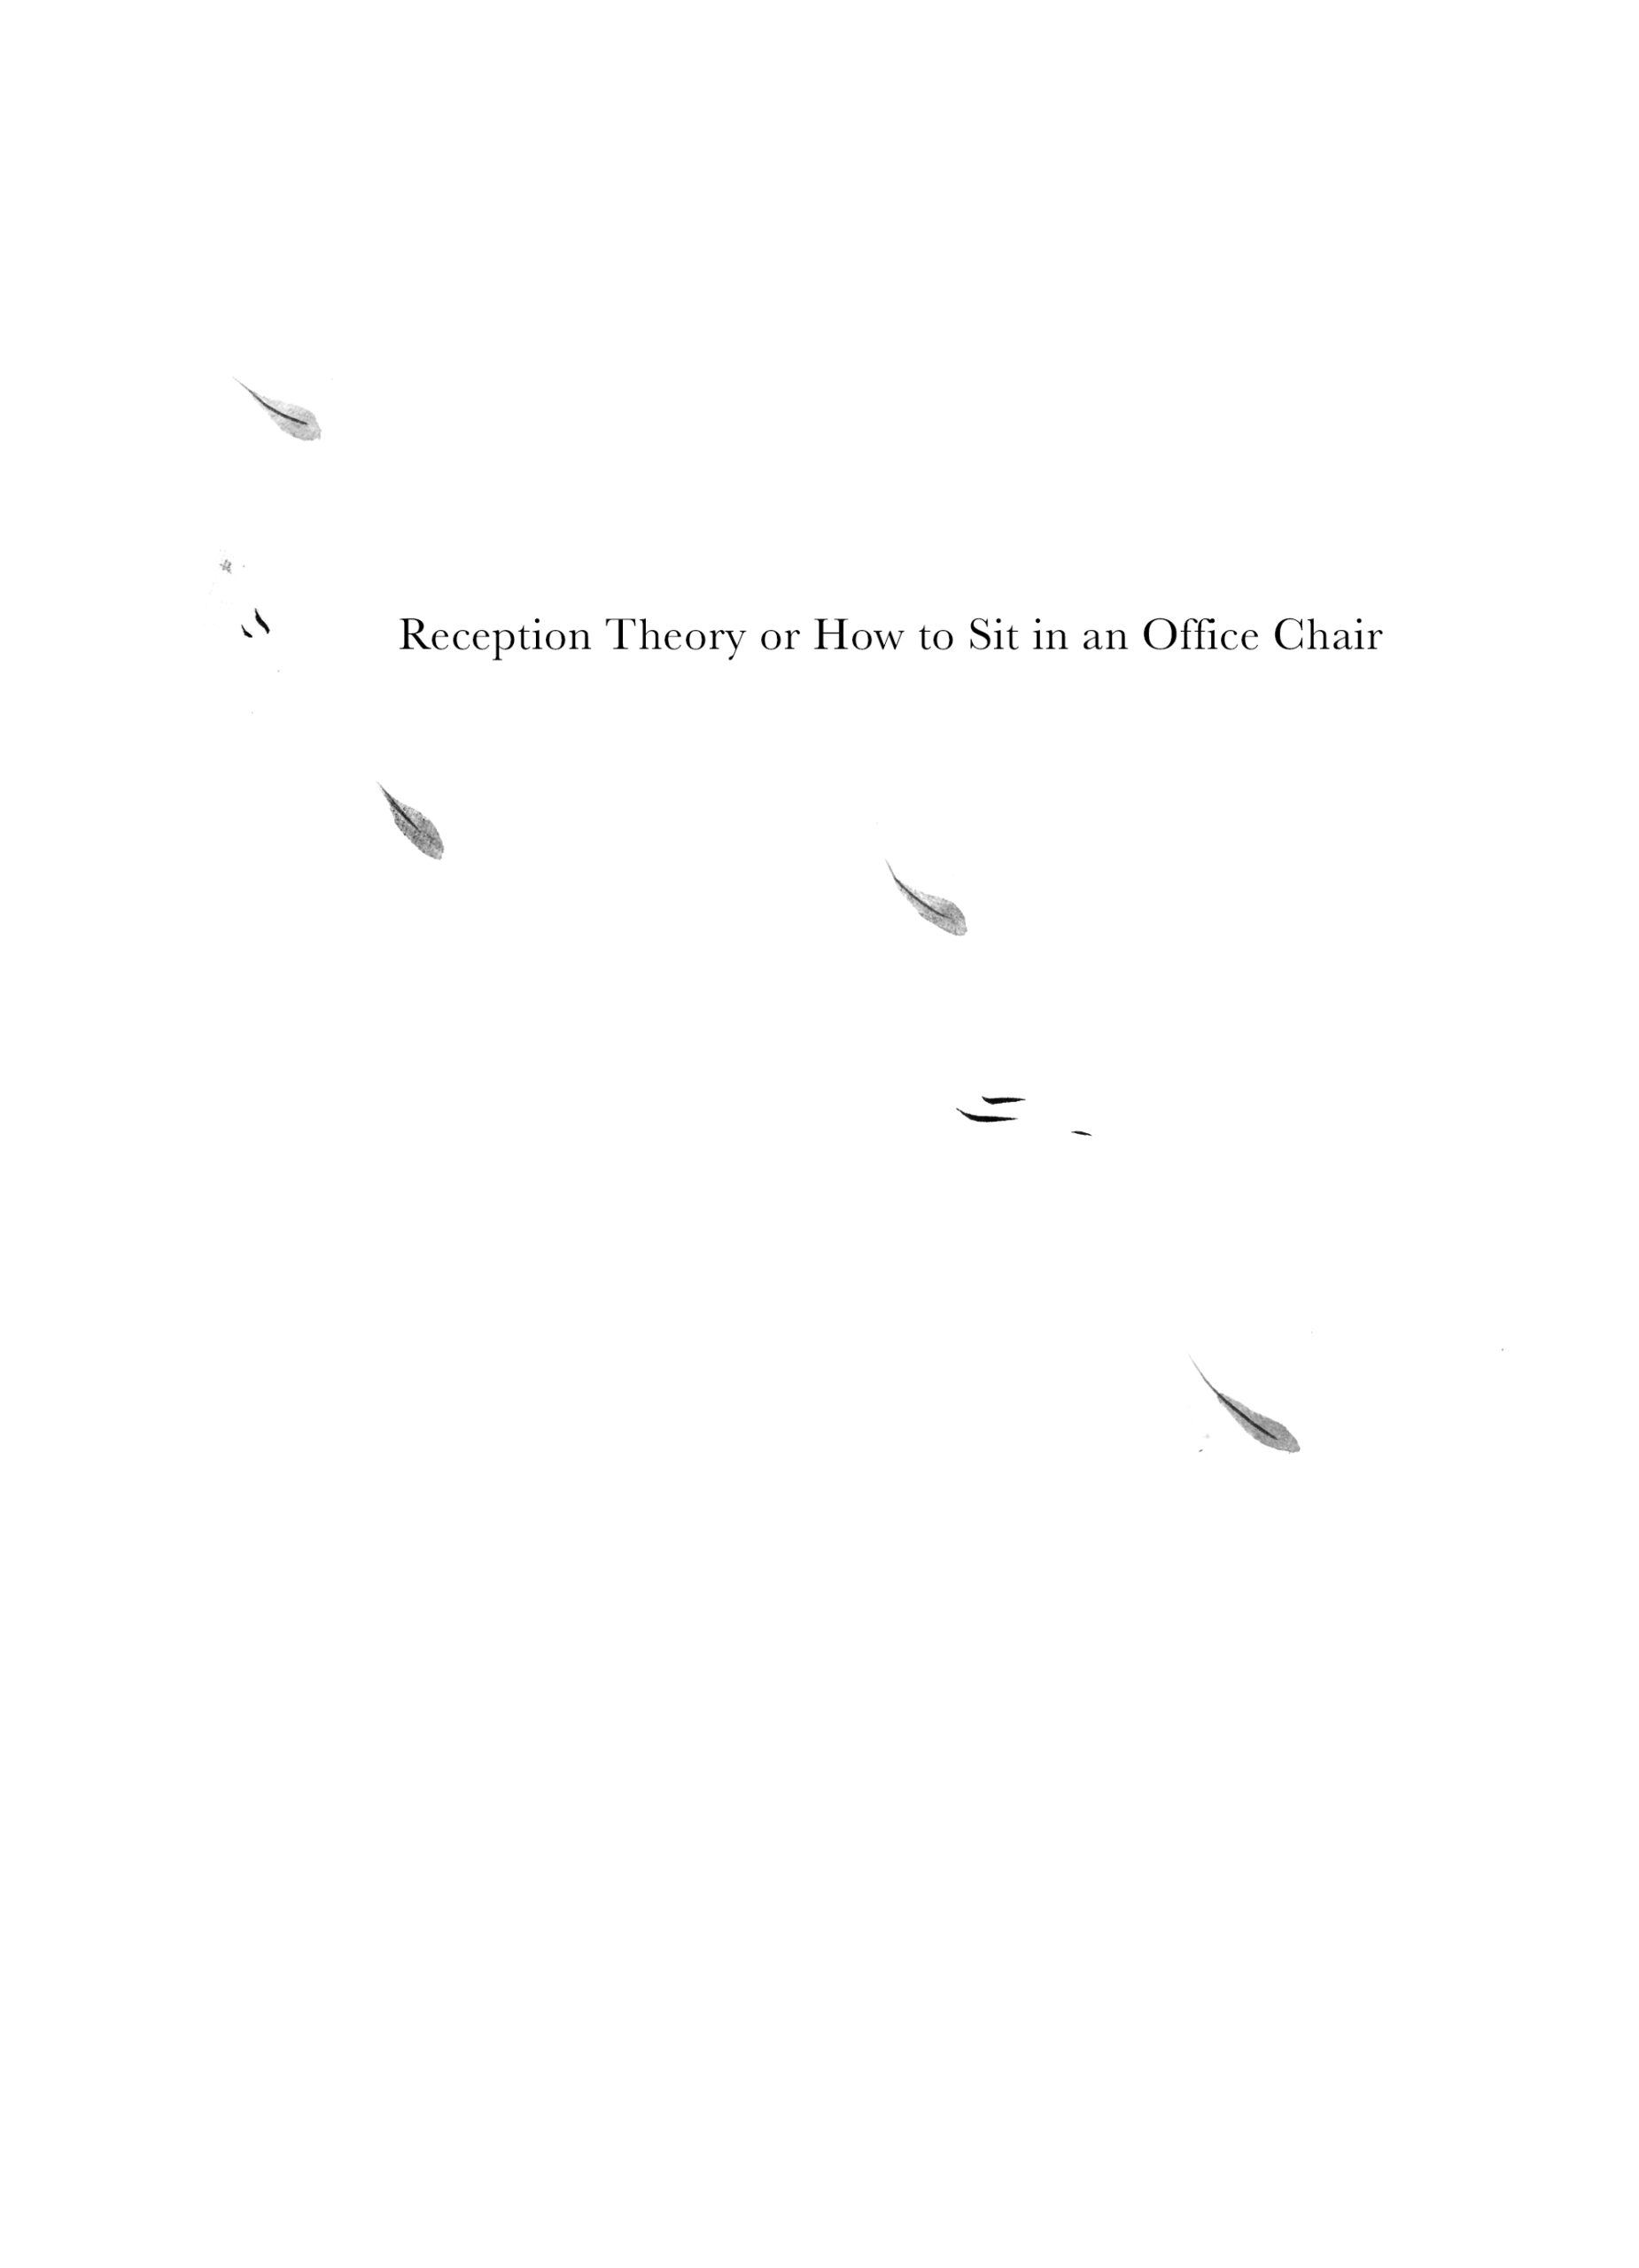 Text against a white background where monochrome leaves seem to drift through sparsely. The text reads: Reception Theory or How to Sit in an Office Chair